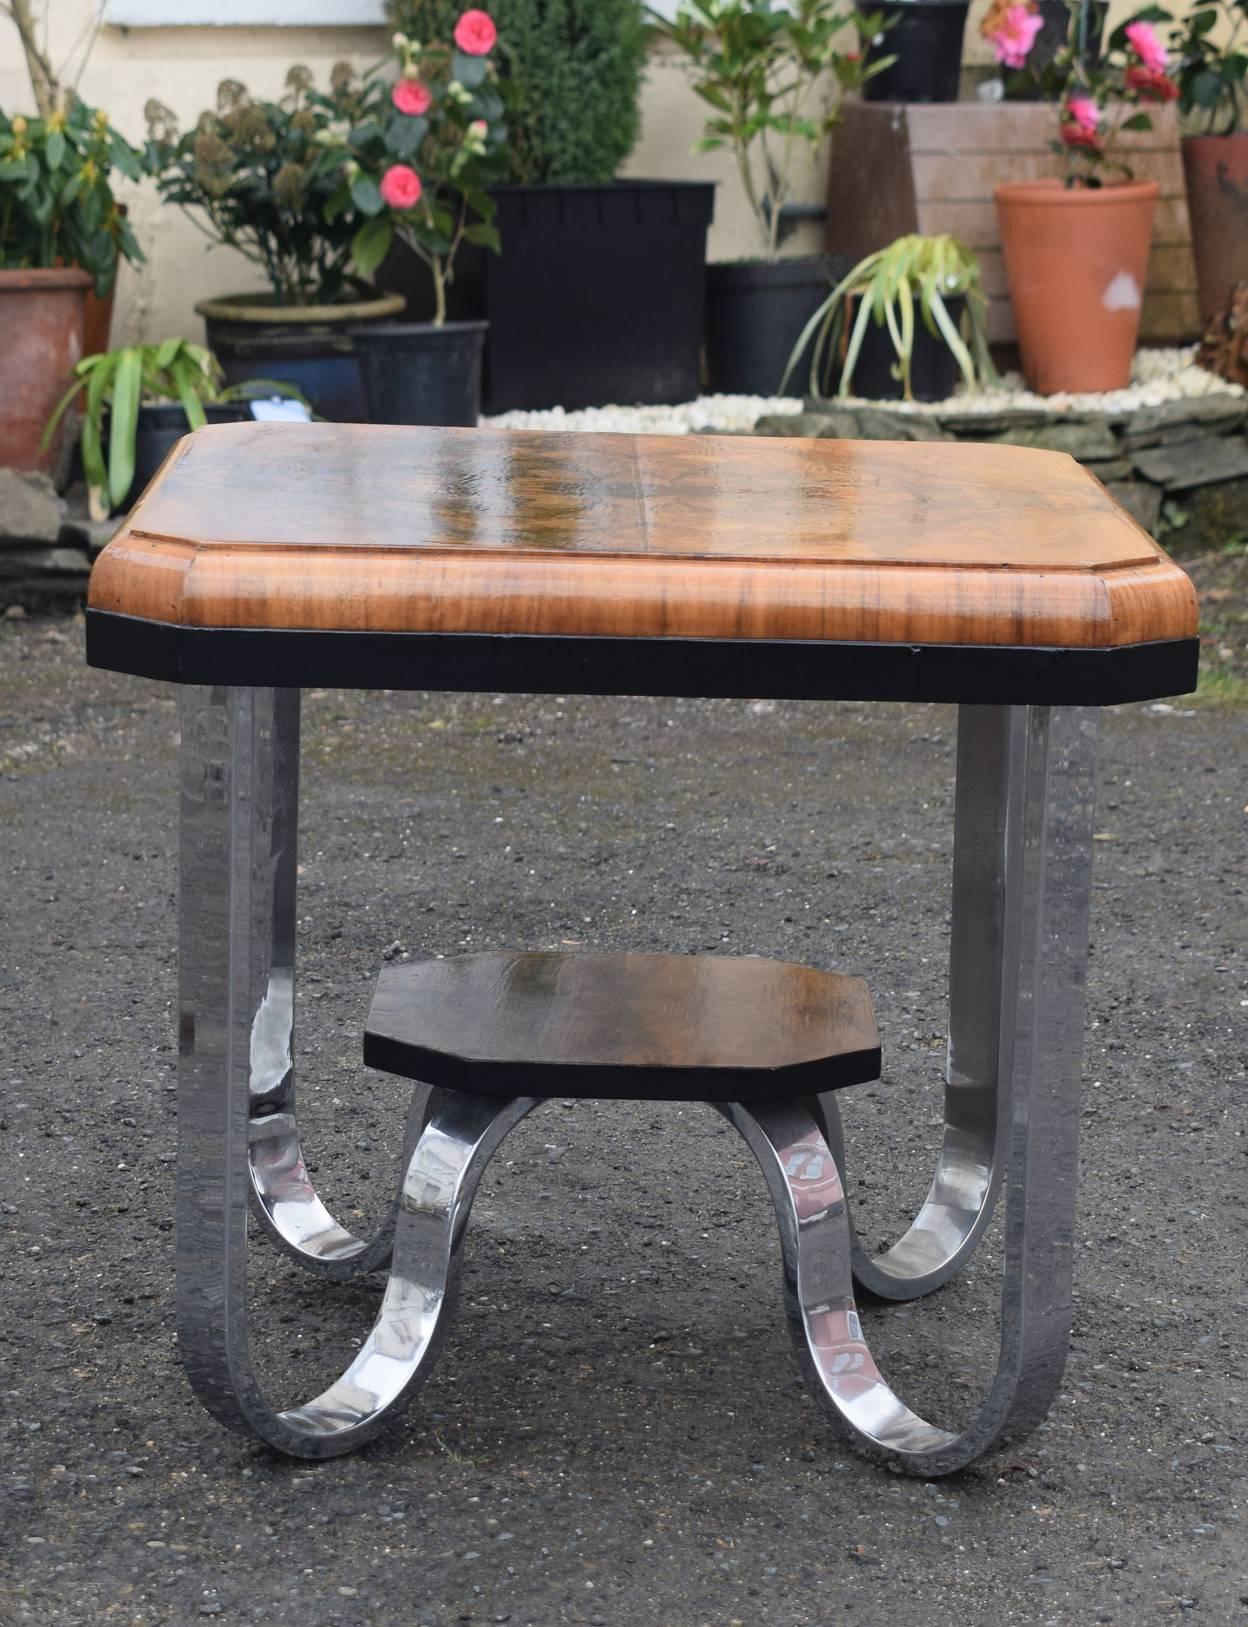 A table with the wow factor is this totally authentic Art Deco modernist table dating to the 1930s. Features a very highly polished figured burl walnut top with an ebonised trim around the edge. The top is supported by four chrome U bend legs which